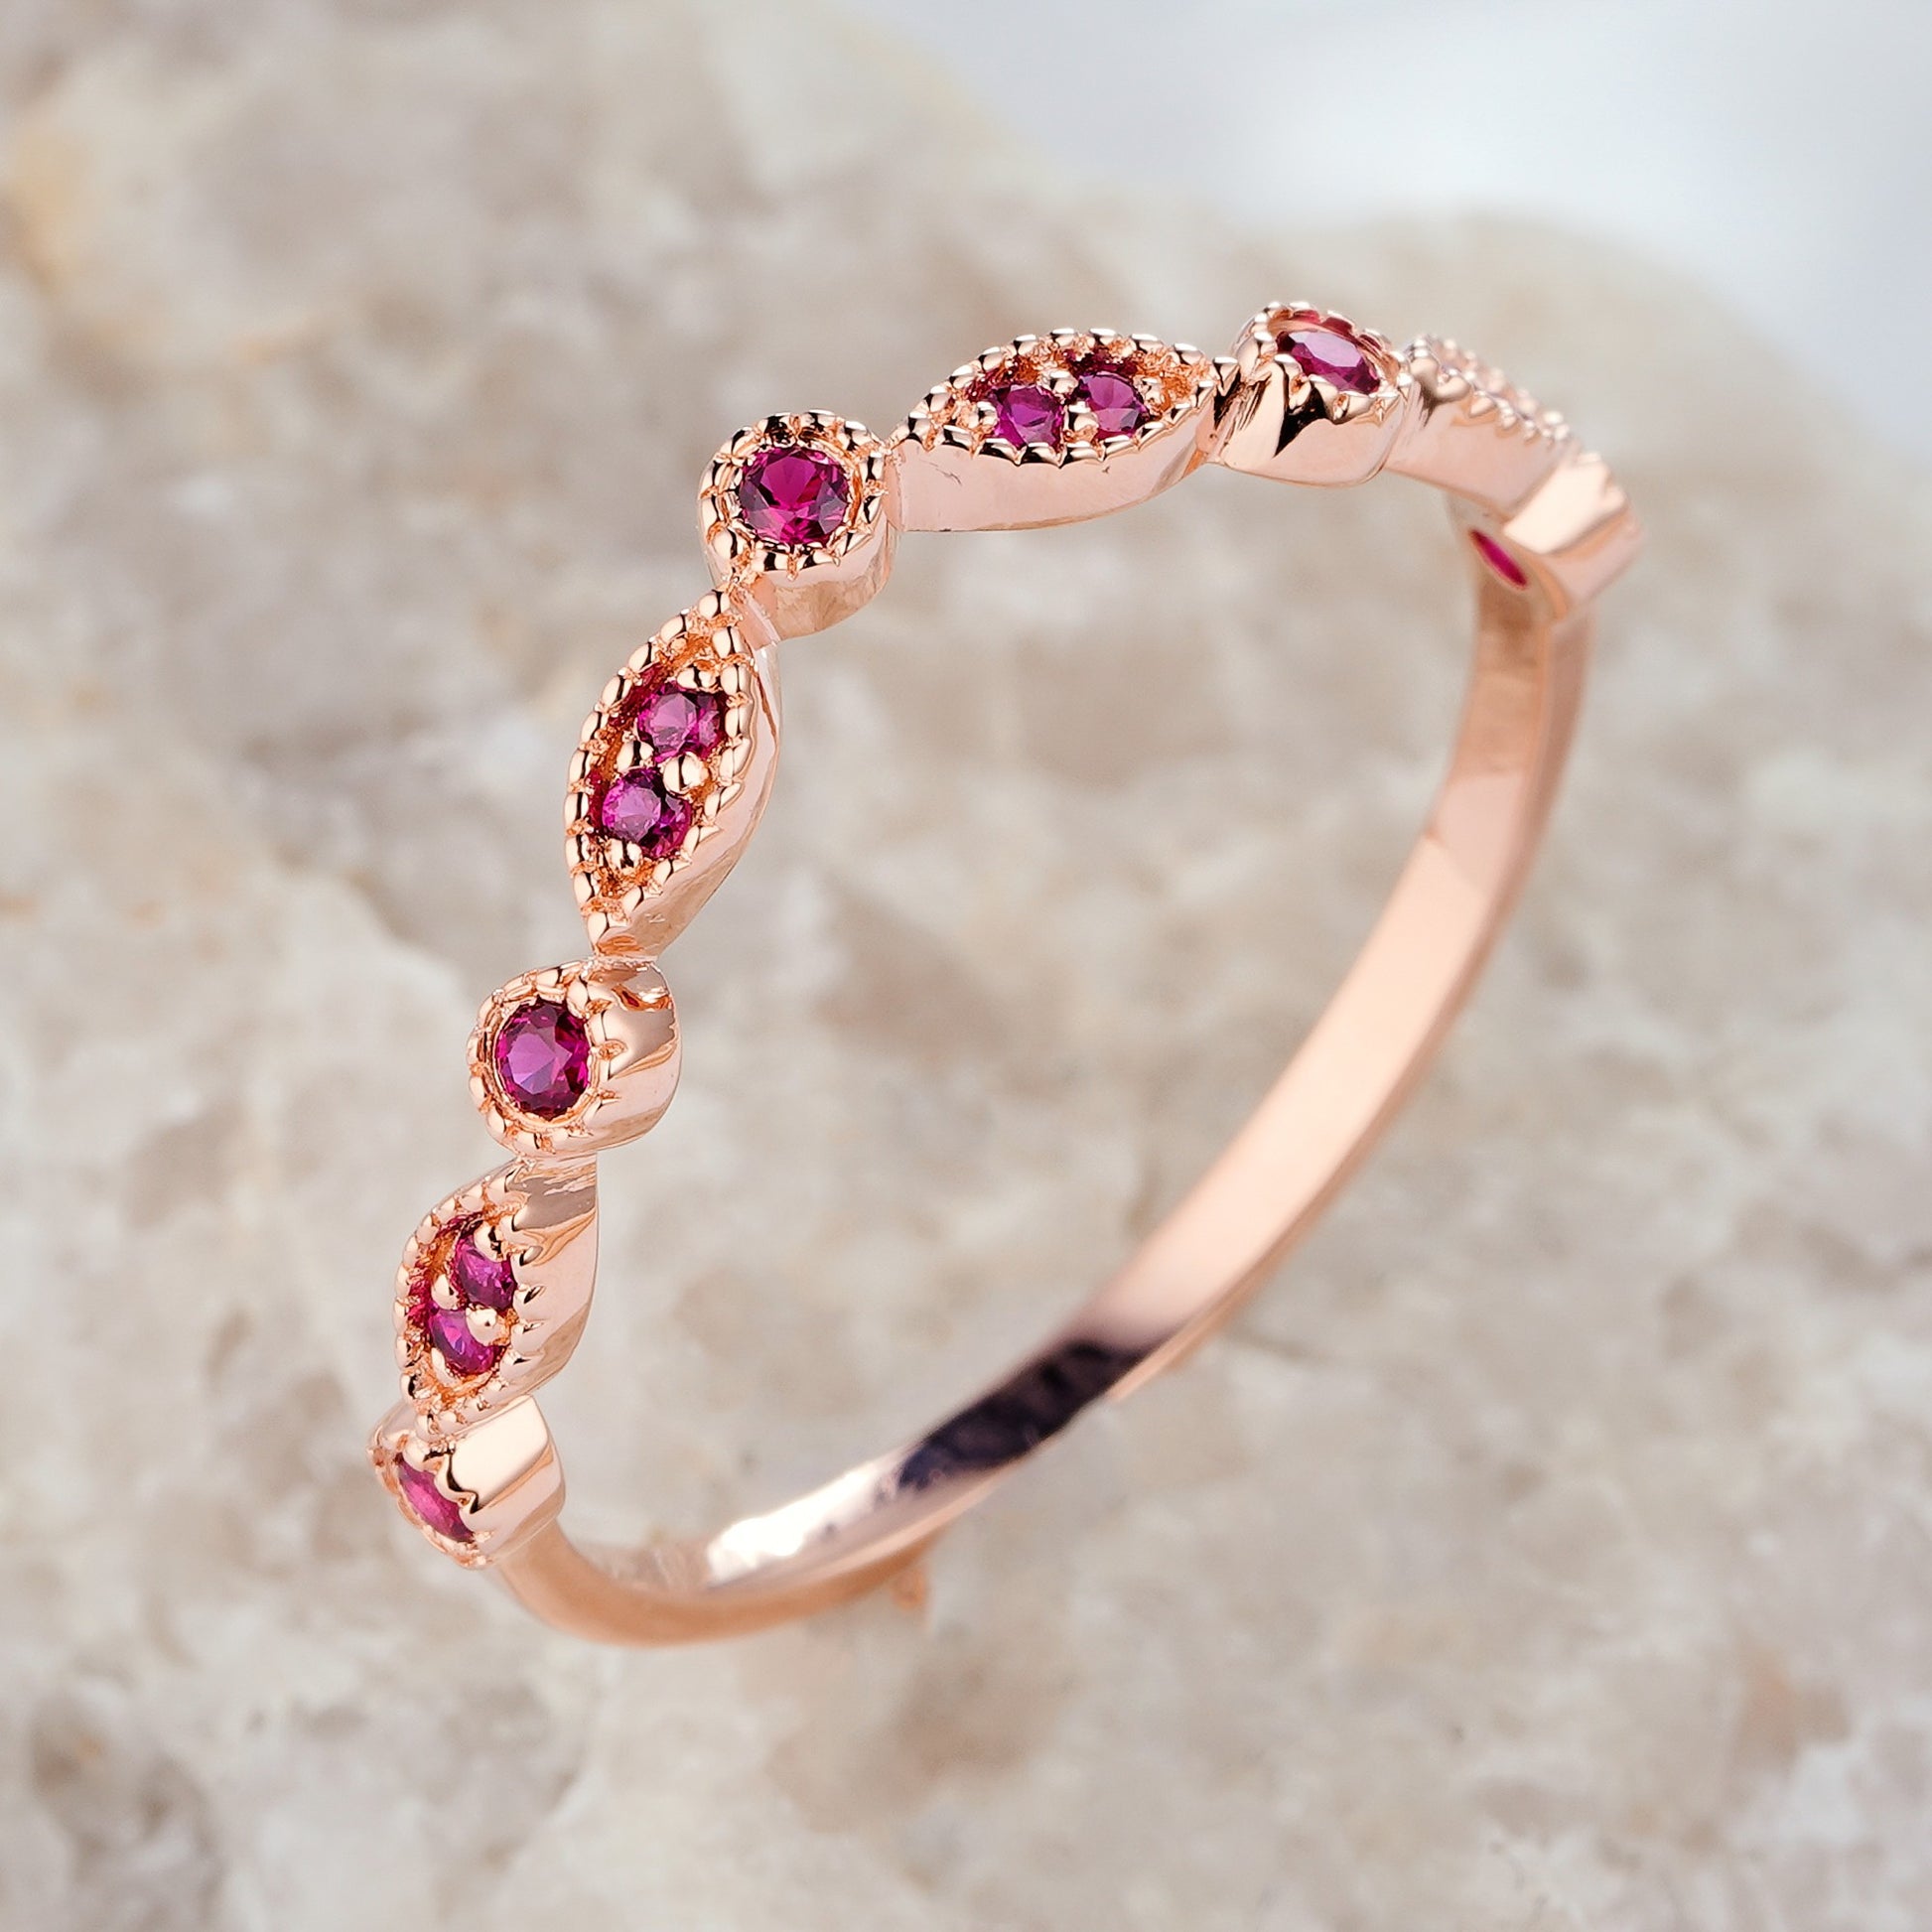 Ruby Birthstone Engagement Ring V Shaped Band Ring in 14K/18K Gold - ShainJewelry